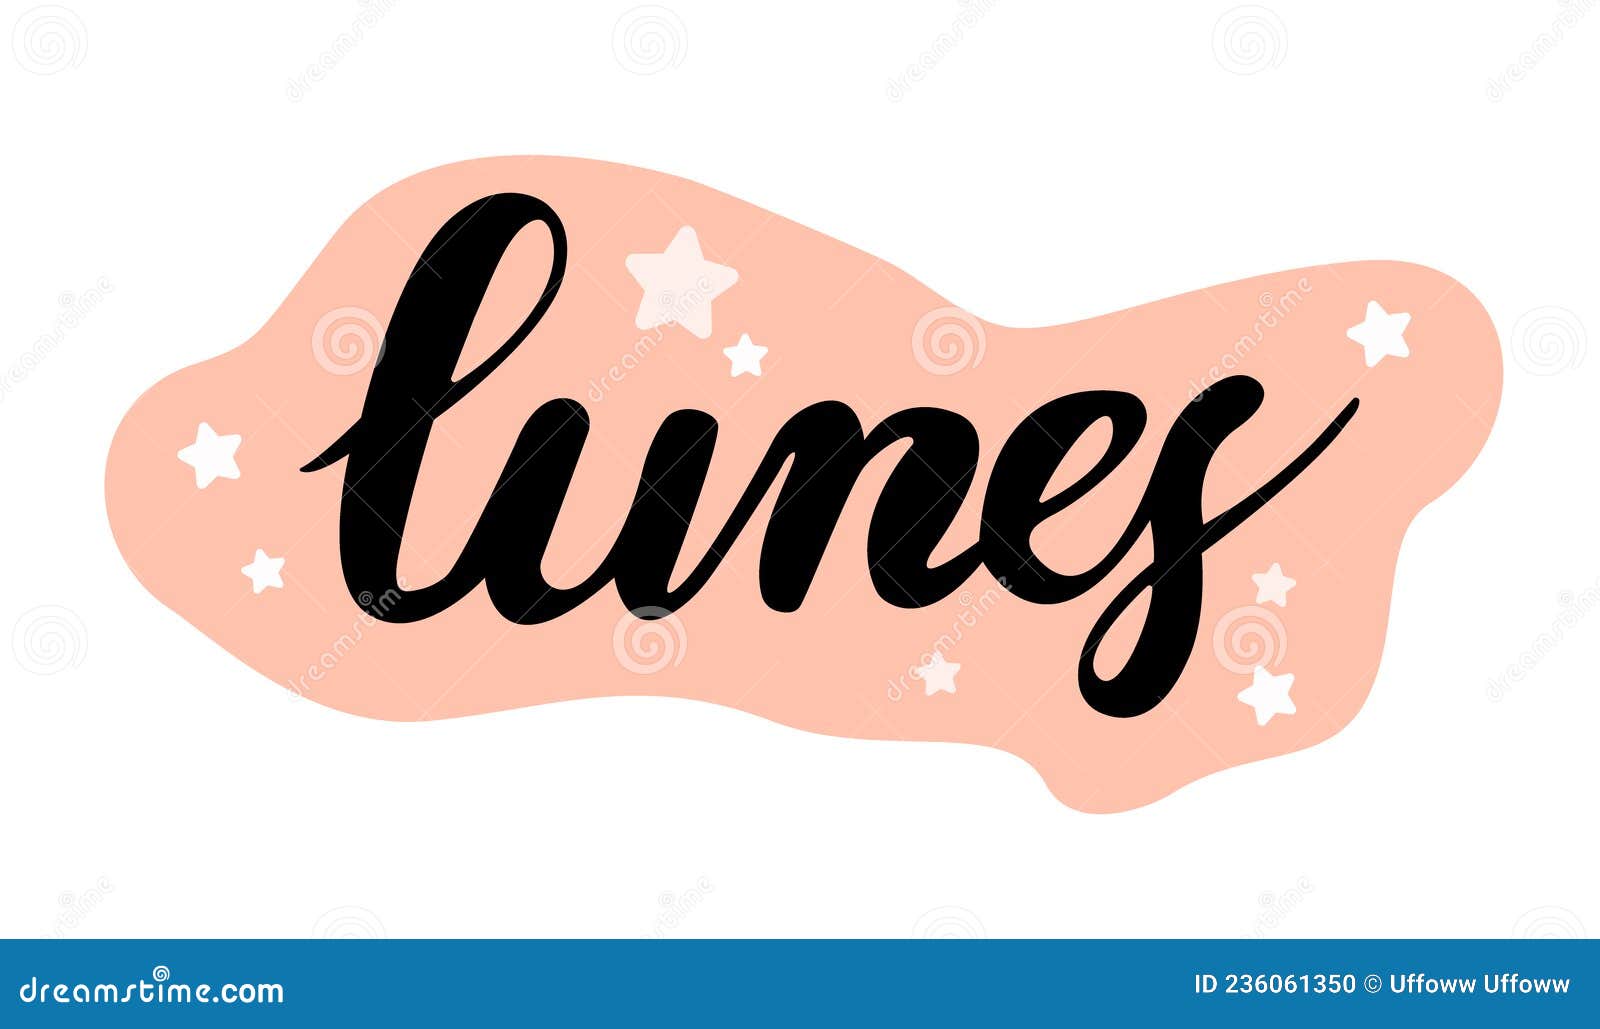 lunes with stars lettering